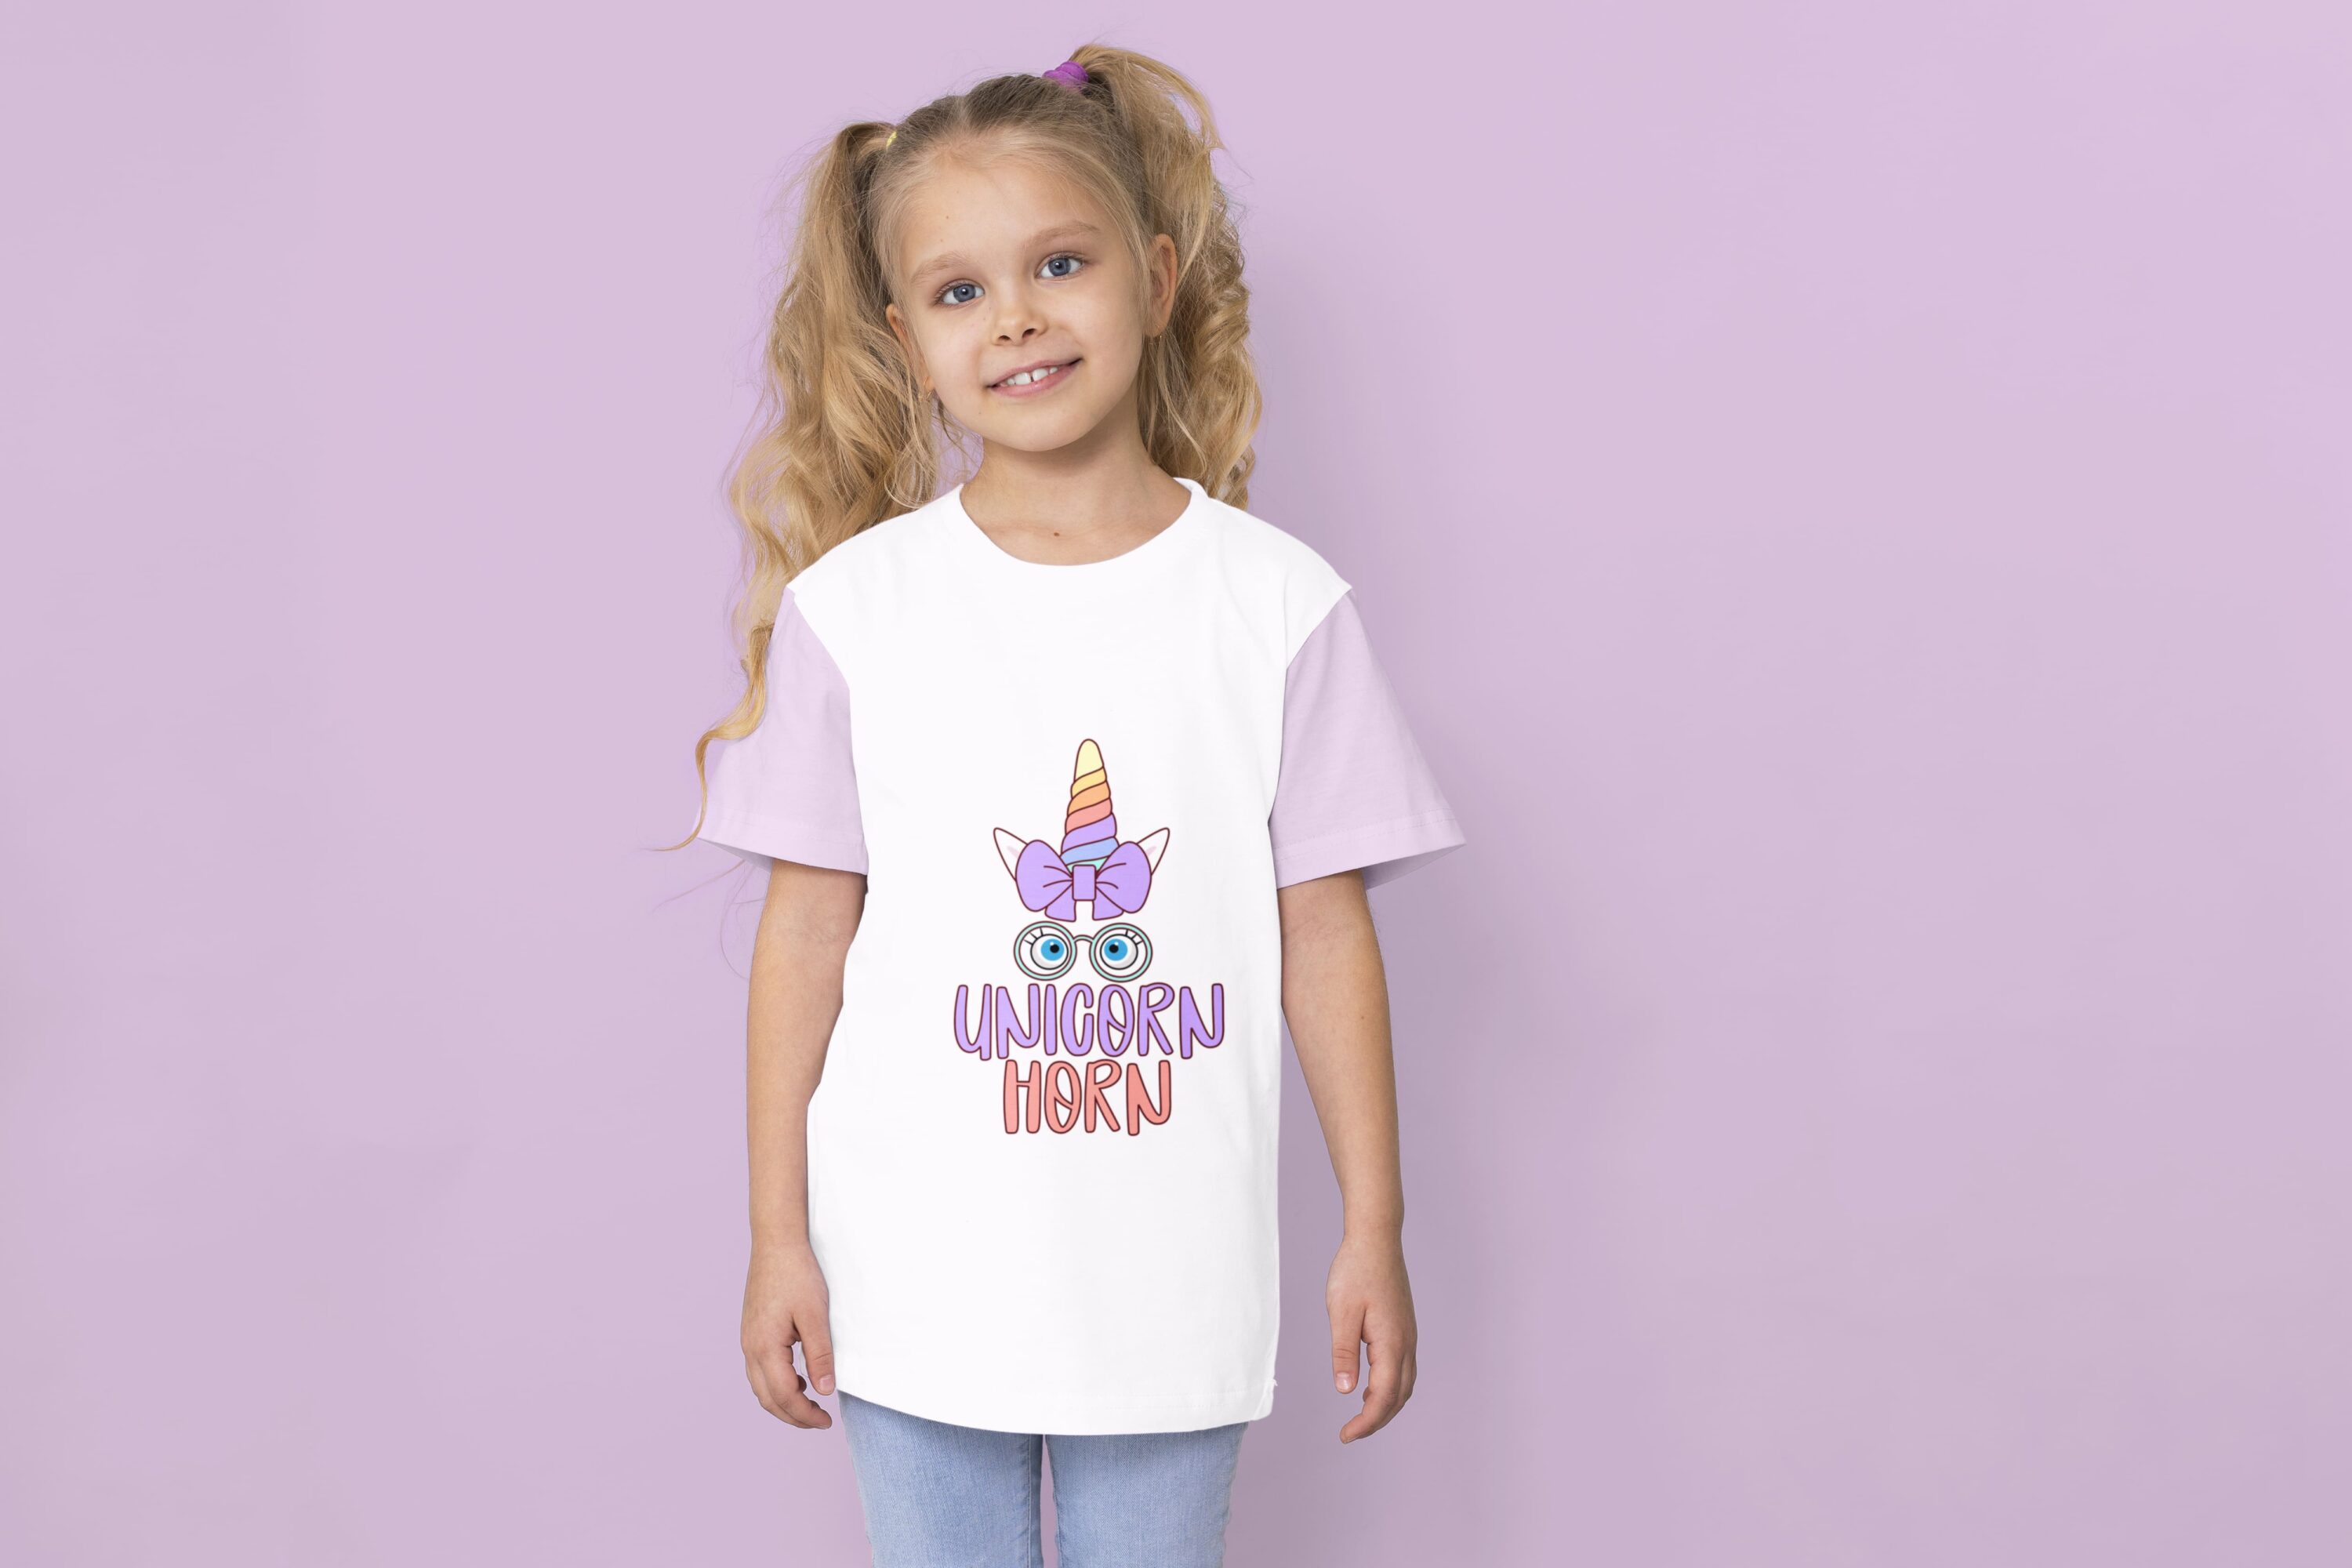 A white t-shirt with lavender sleeves and a colorful unicorn horn with eyes, glasses and lavender bow and lavender lettering "UNICORN" with pink lettering "HORN" on a girl against a lavender background.